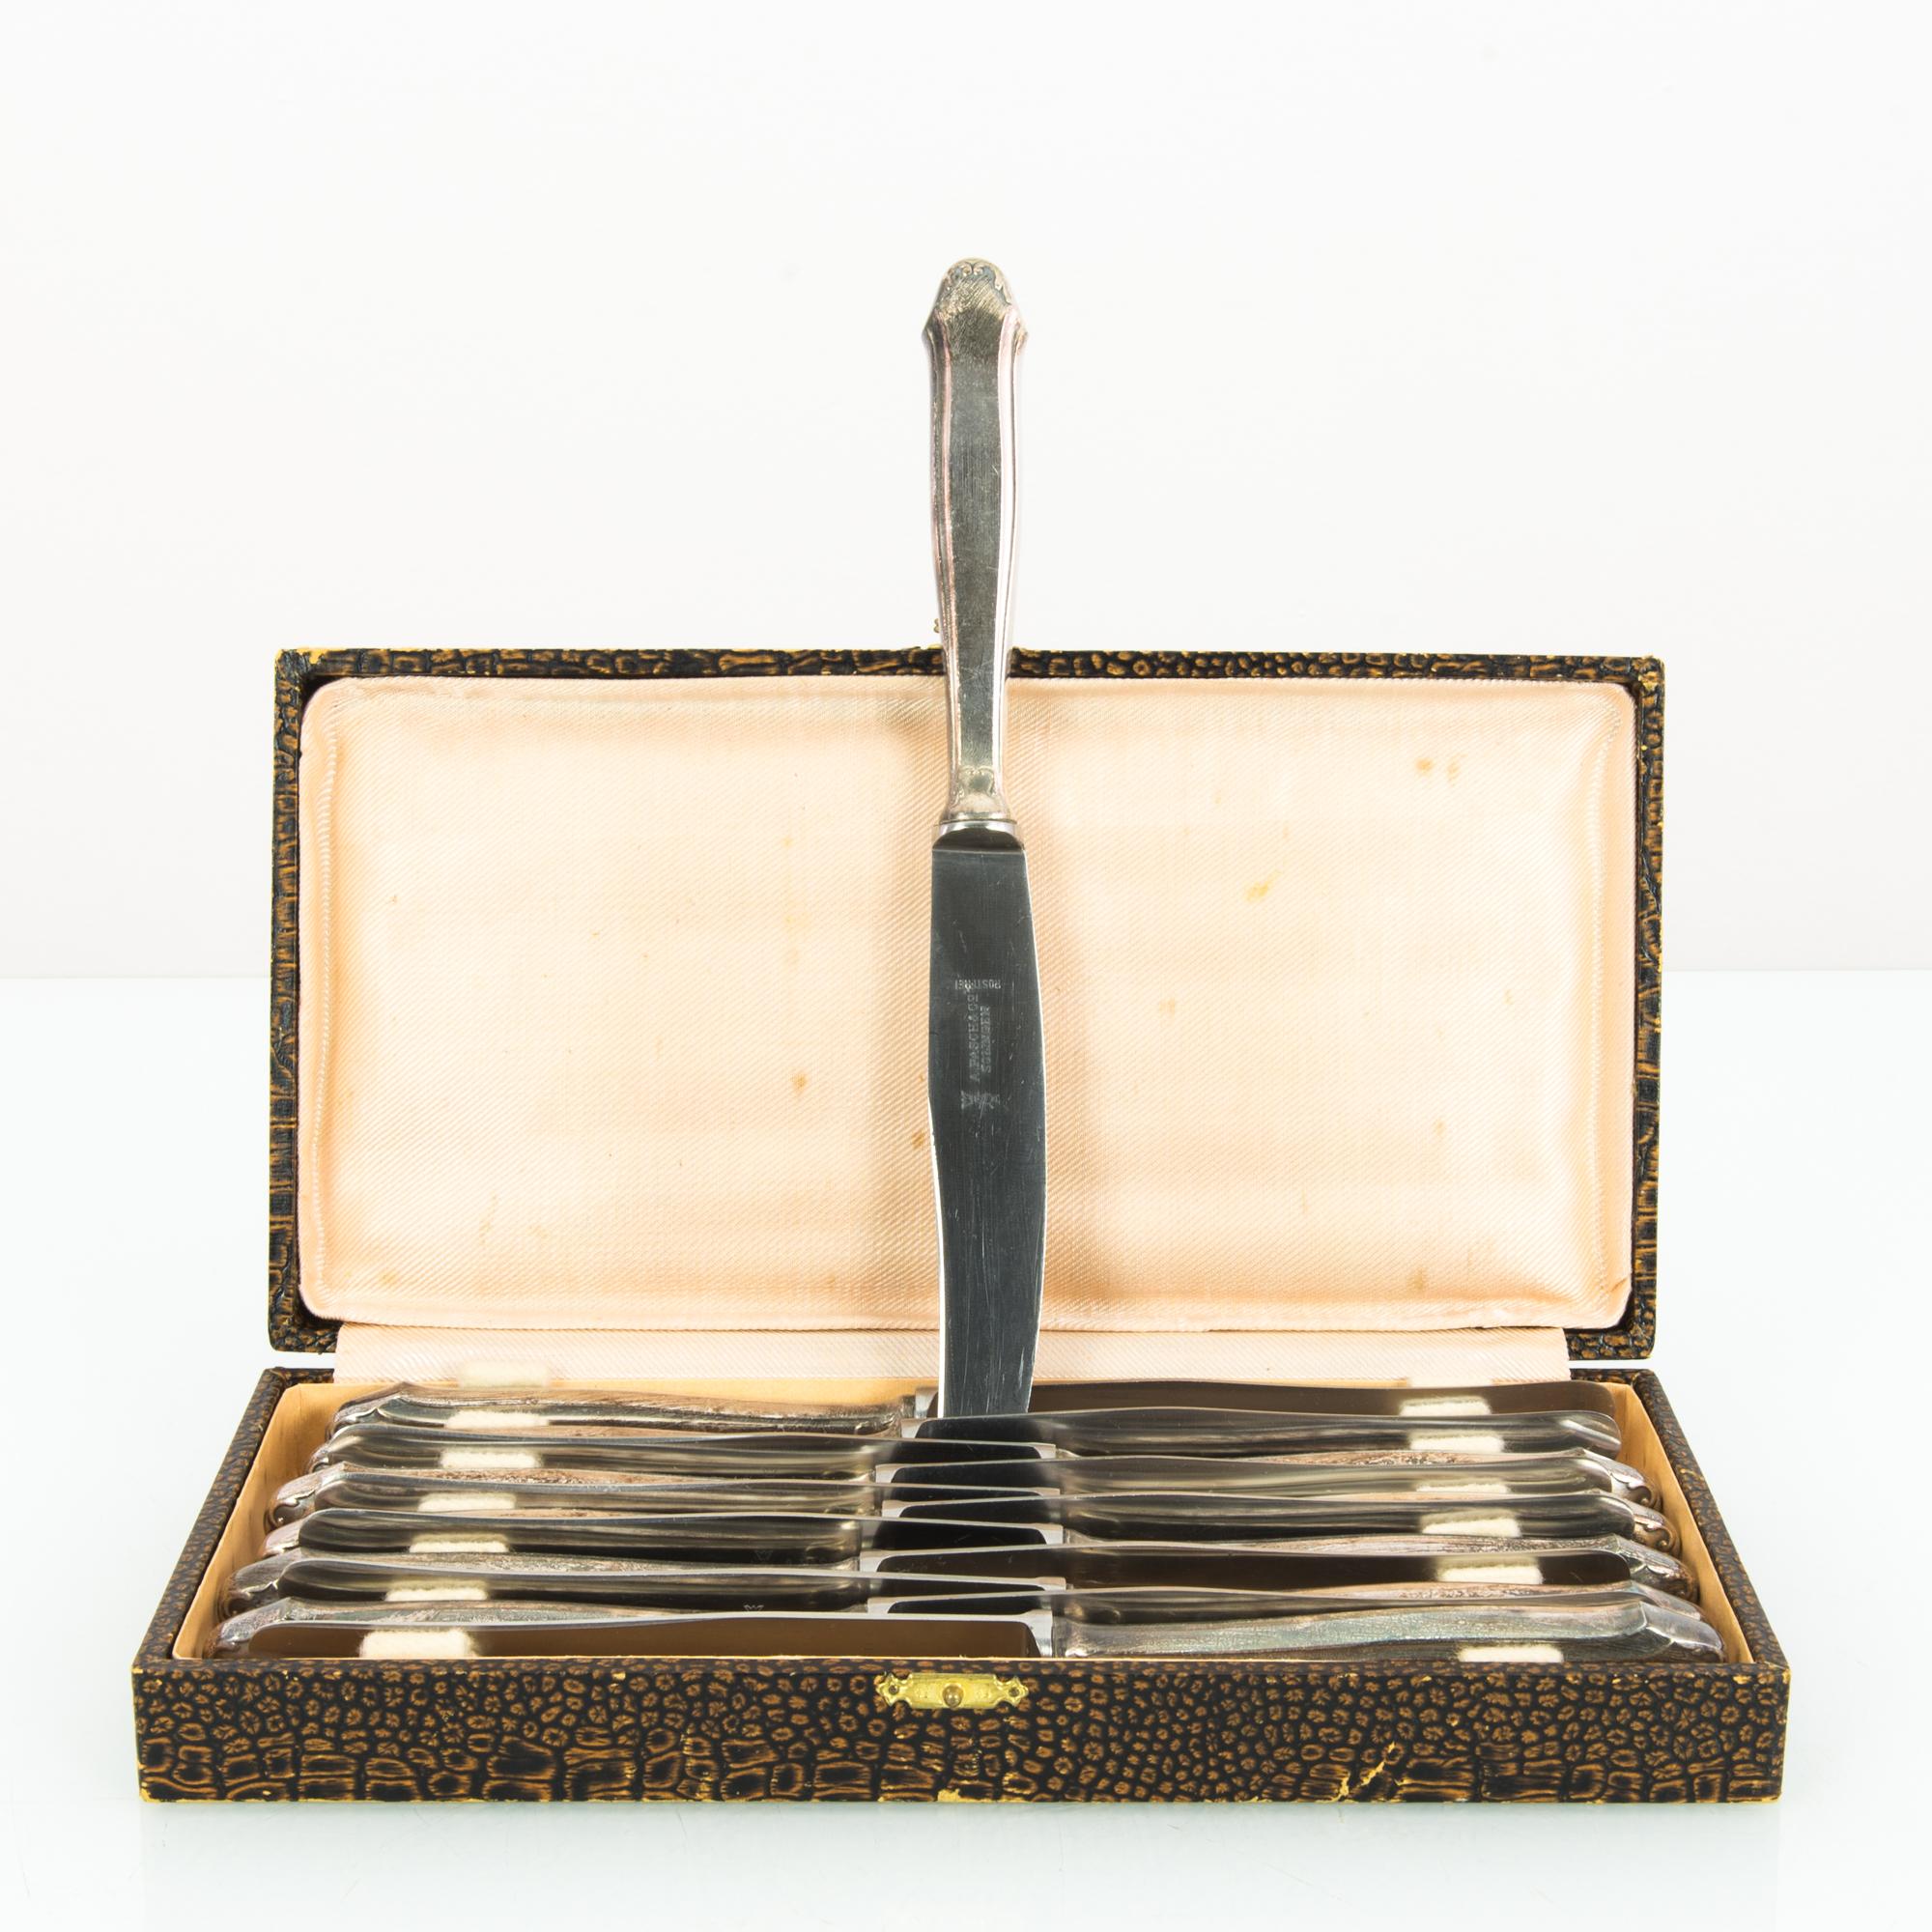 This set of twelve silver-plated knives was made in Europe, circa 1920. They come in a hinged, rectangular box, elegantly lined with beige fabric for a quaint allure. One side of the blade is engraved with “A. PASCHE & CO, SOLINGEN.”